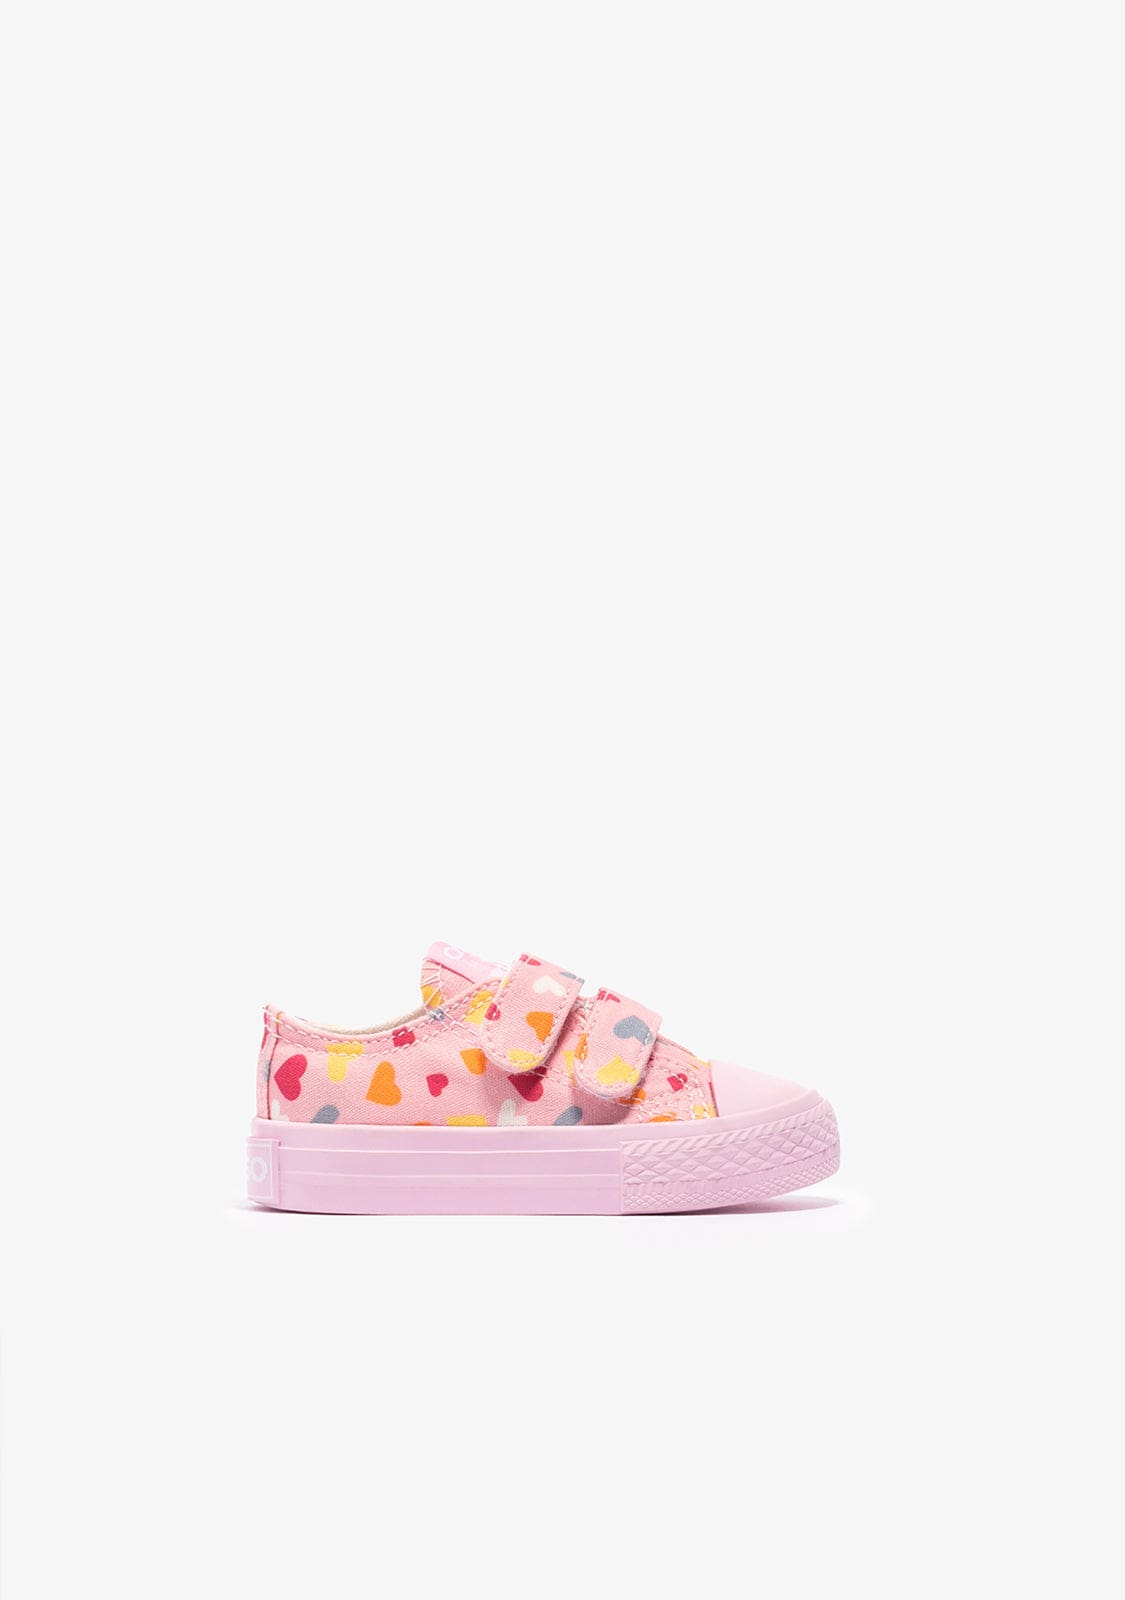 OSITO Shoes Baby's Pink Heart Sneakers Canvas